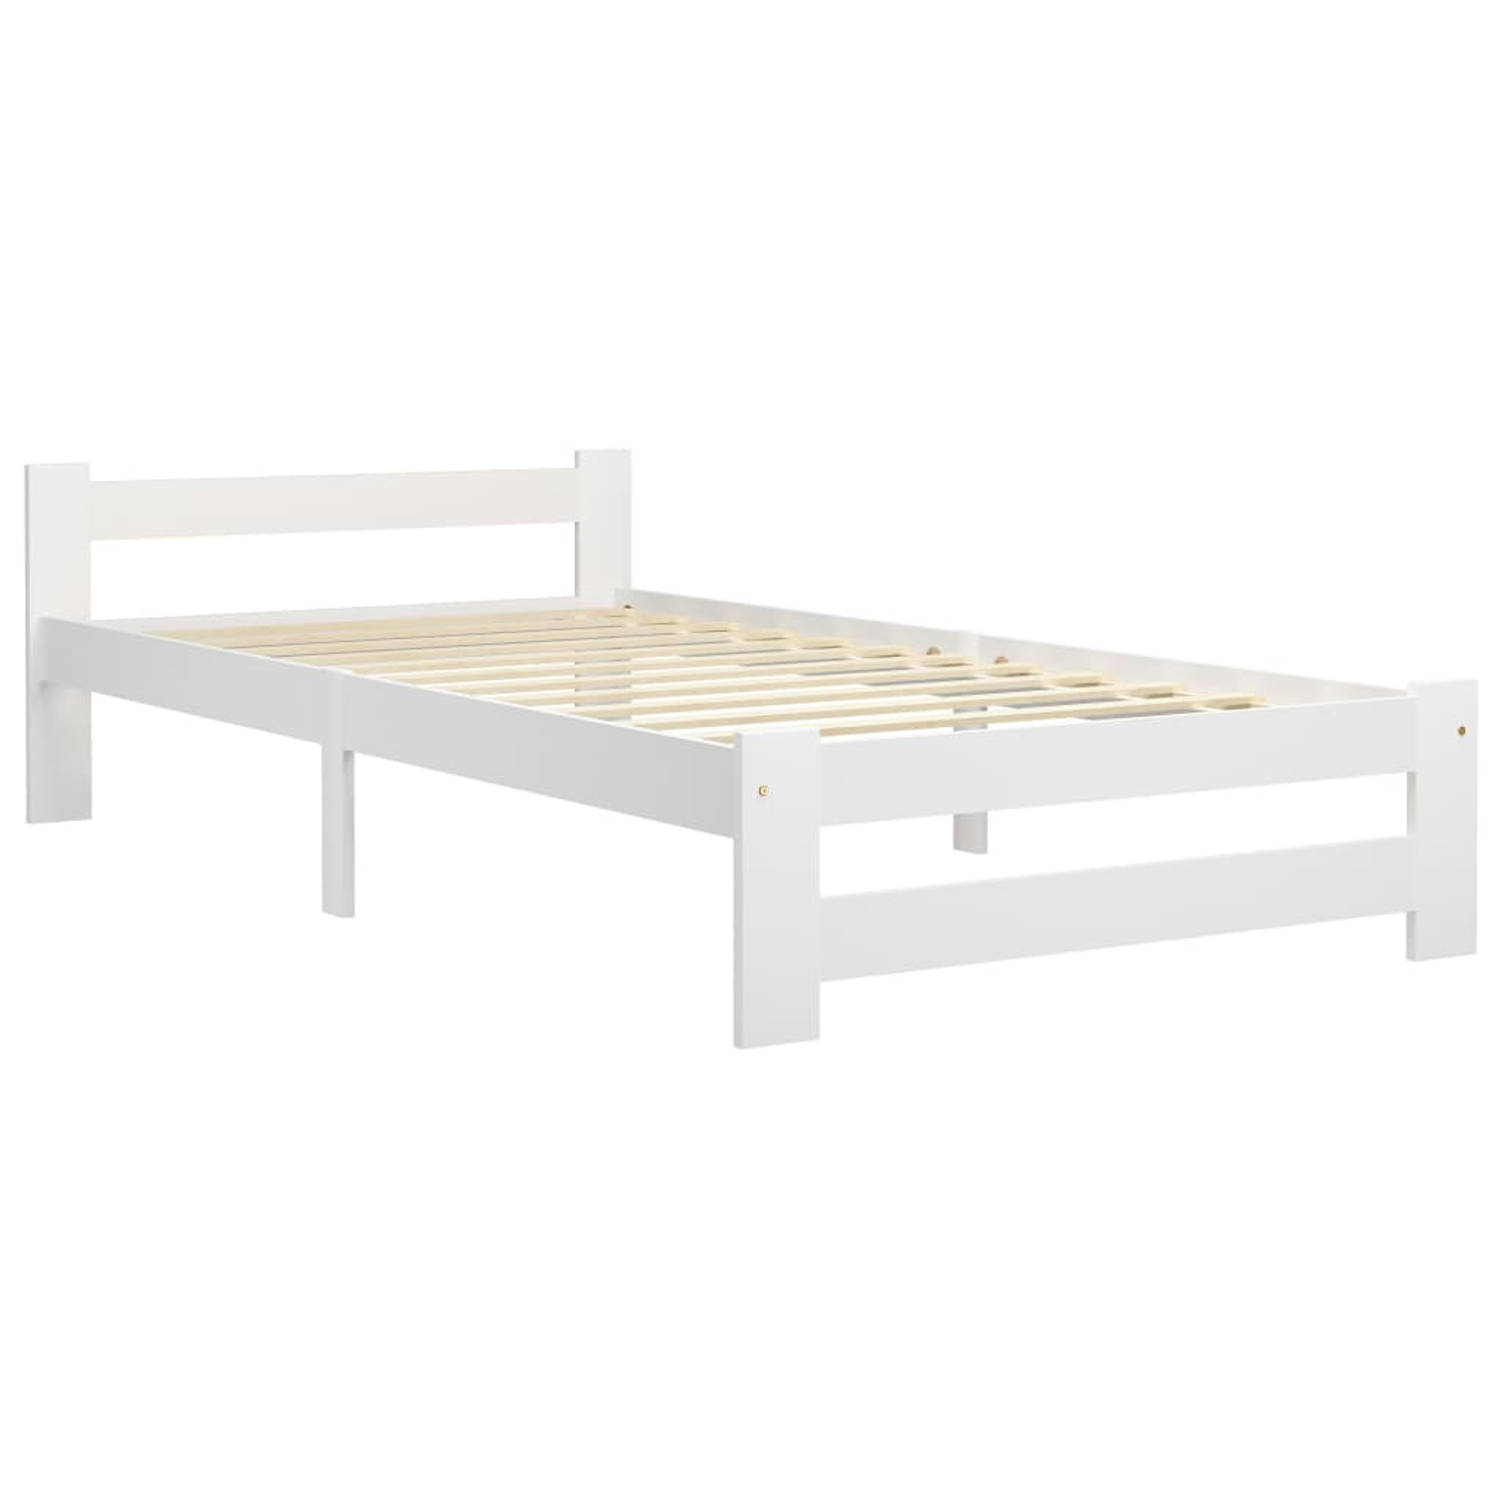 The Living Store Bedframe massief grenenhout wit 100x200 cm - Bedframe - Bedframe - Bed Frame - Bed Frames - Bed - Bedden - 1-persoonsbed - 1-persoonsbedden - Eenpersoons Bed